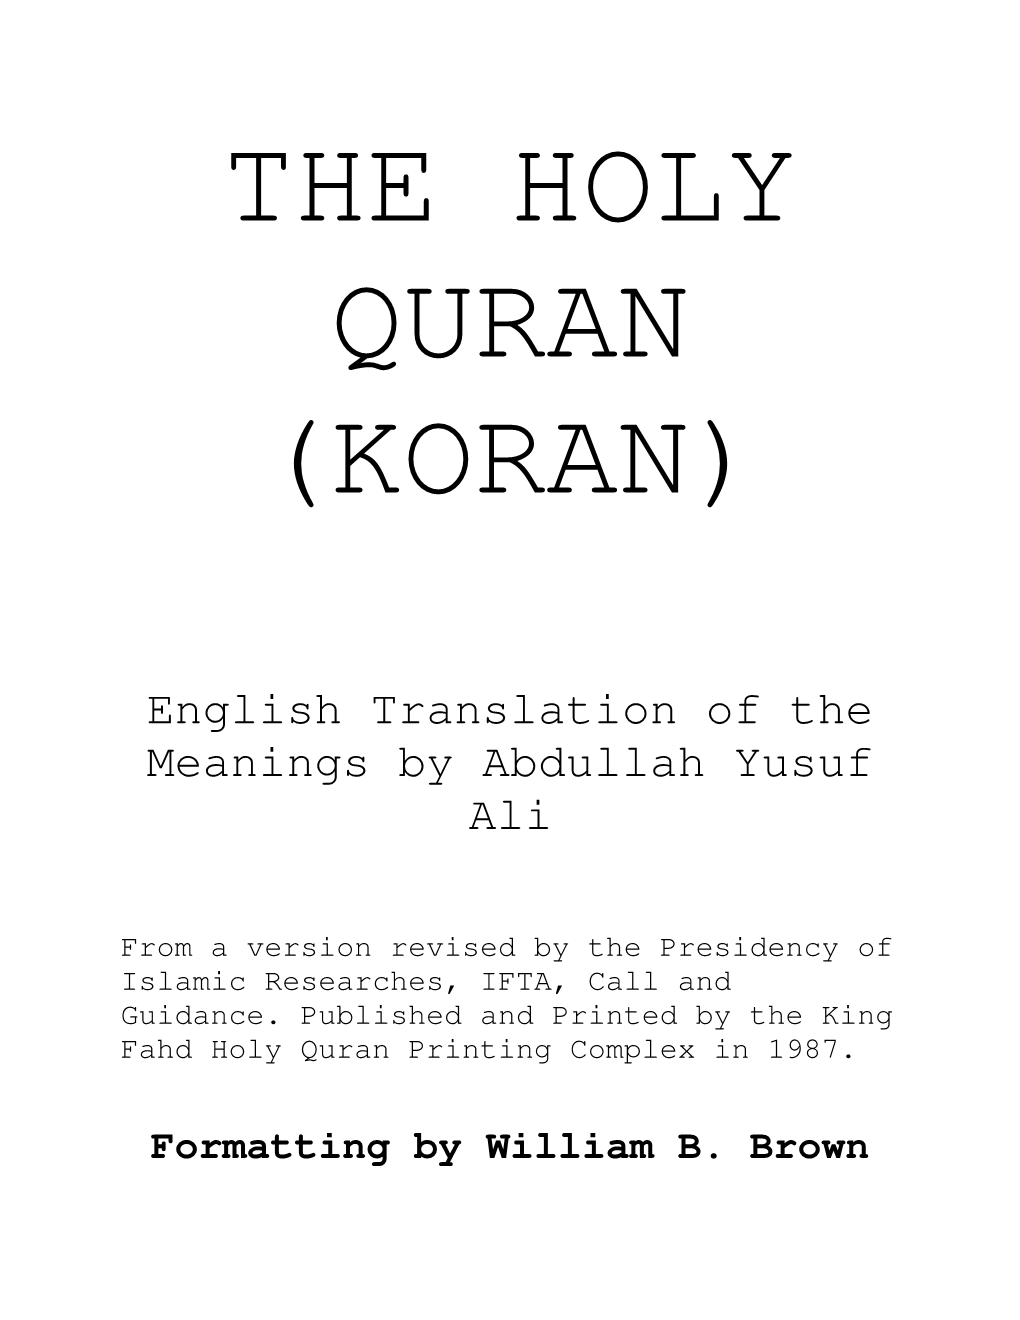 English Translation of the Meanings by Abdullah Yusuf Ali